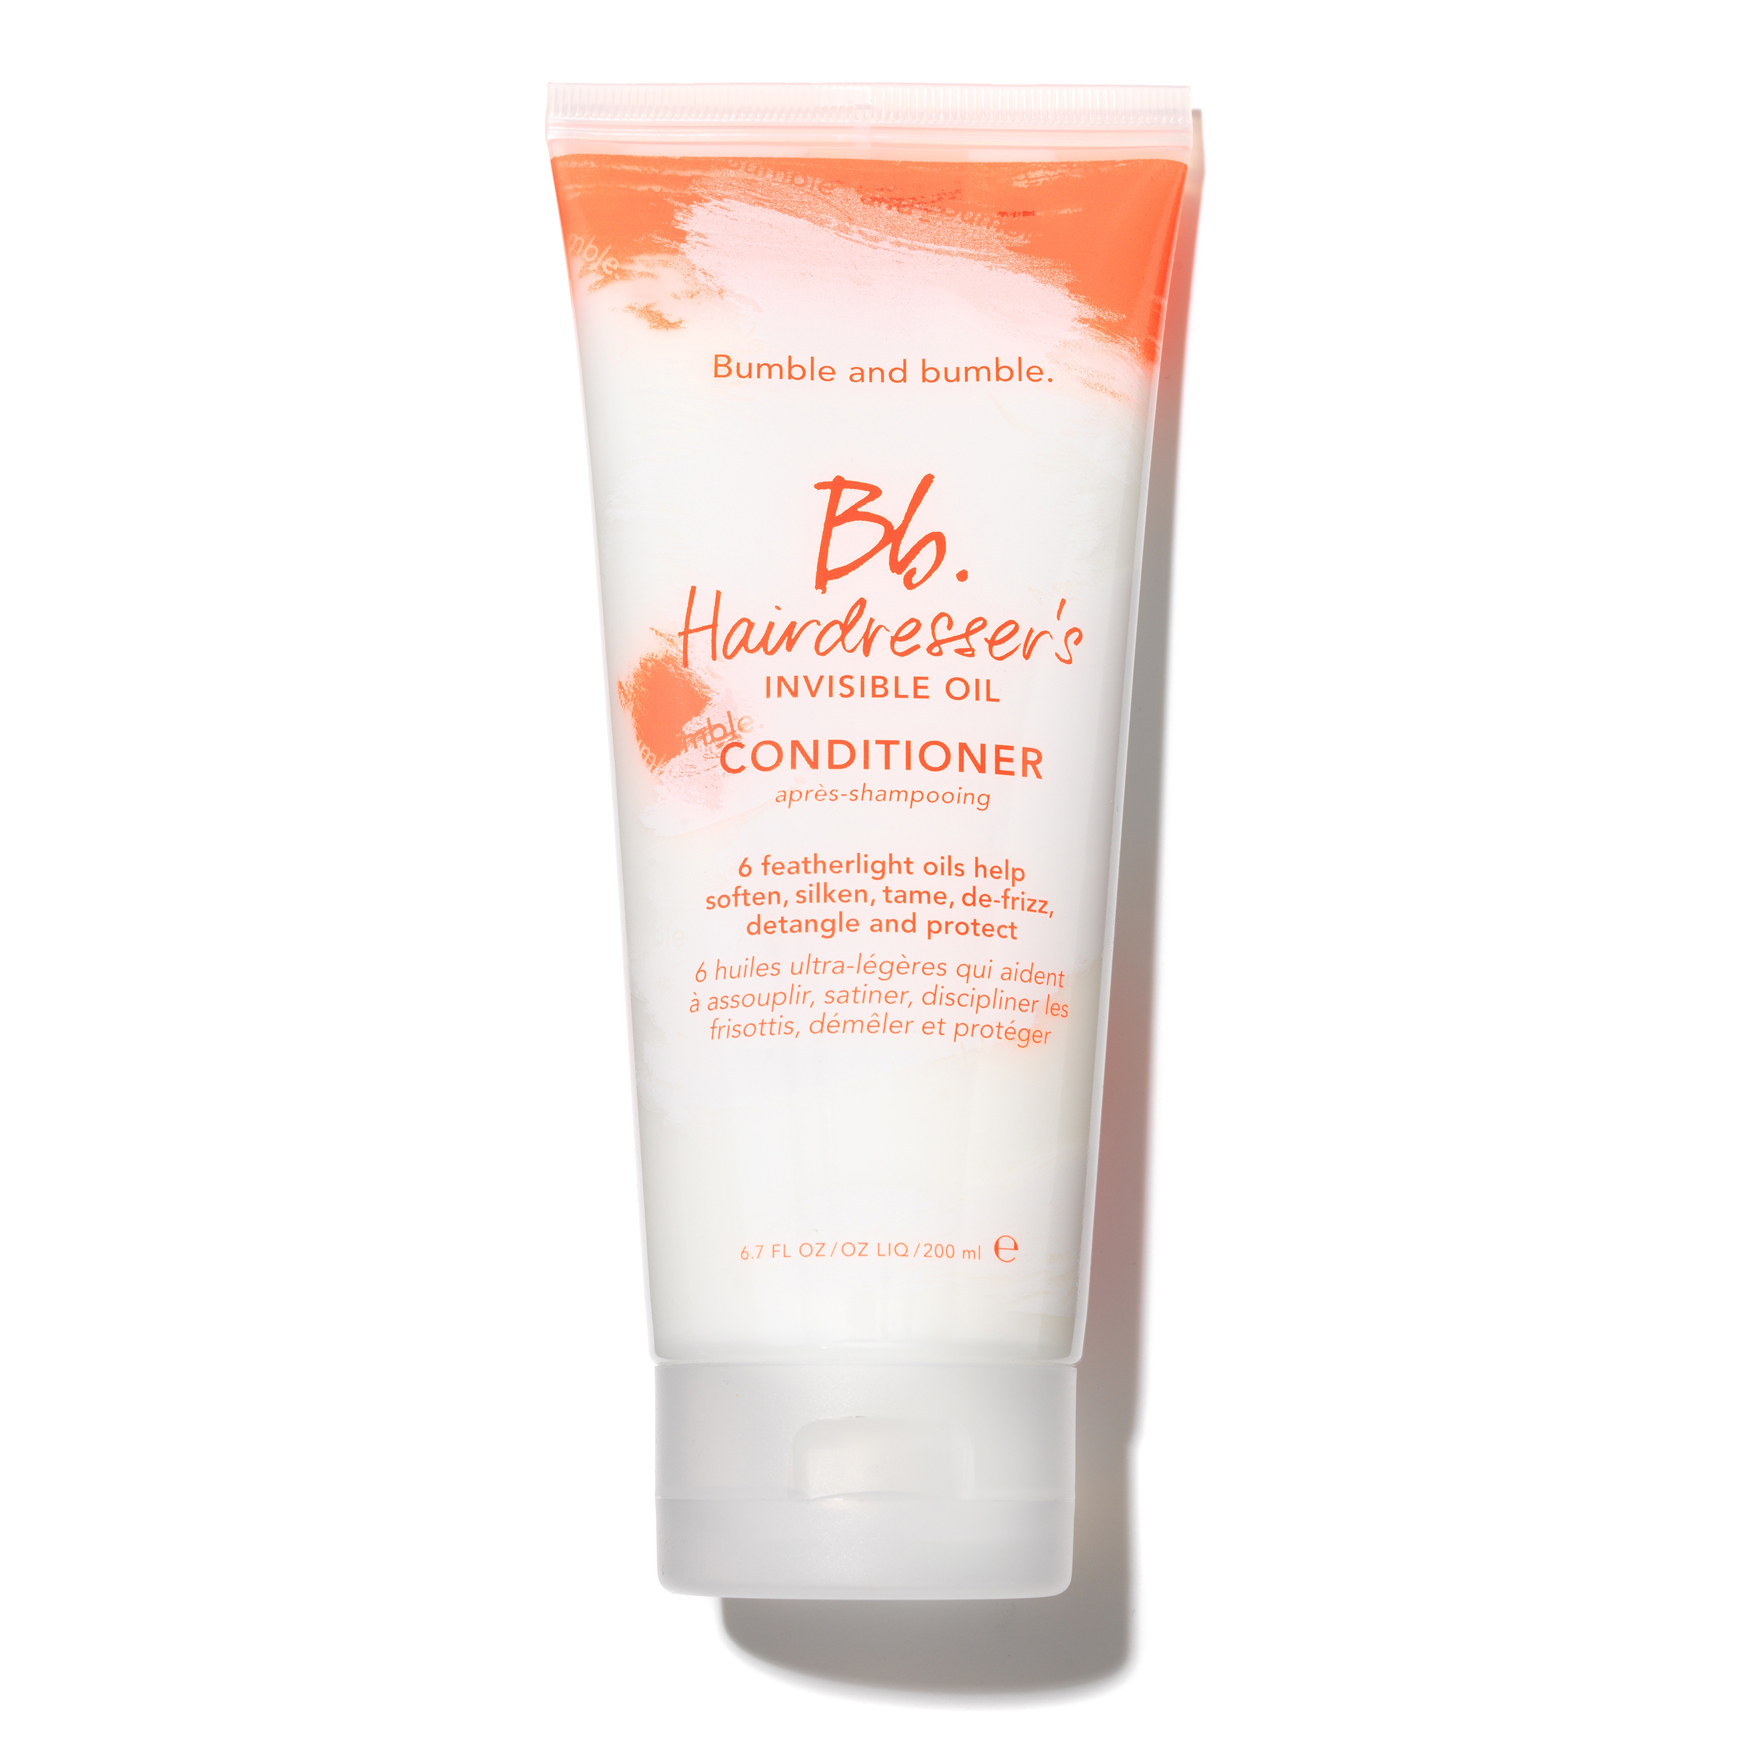 Bumble and Bumble Hairdresser's Invisible Oil Conditioner | Space NK